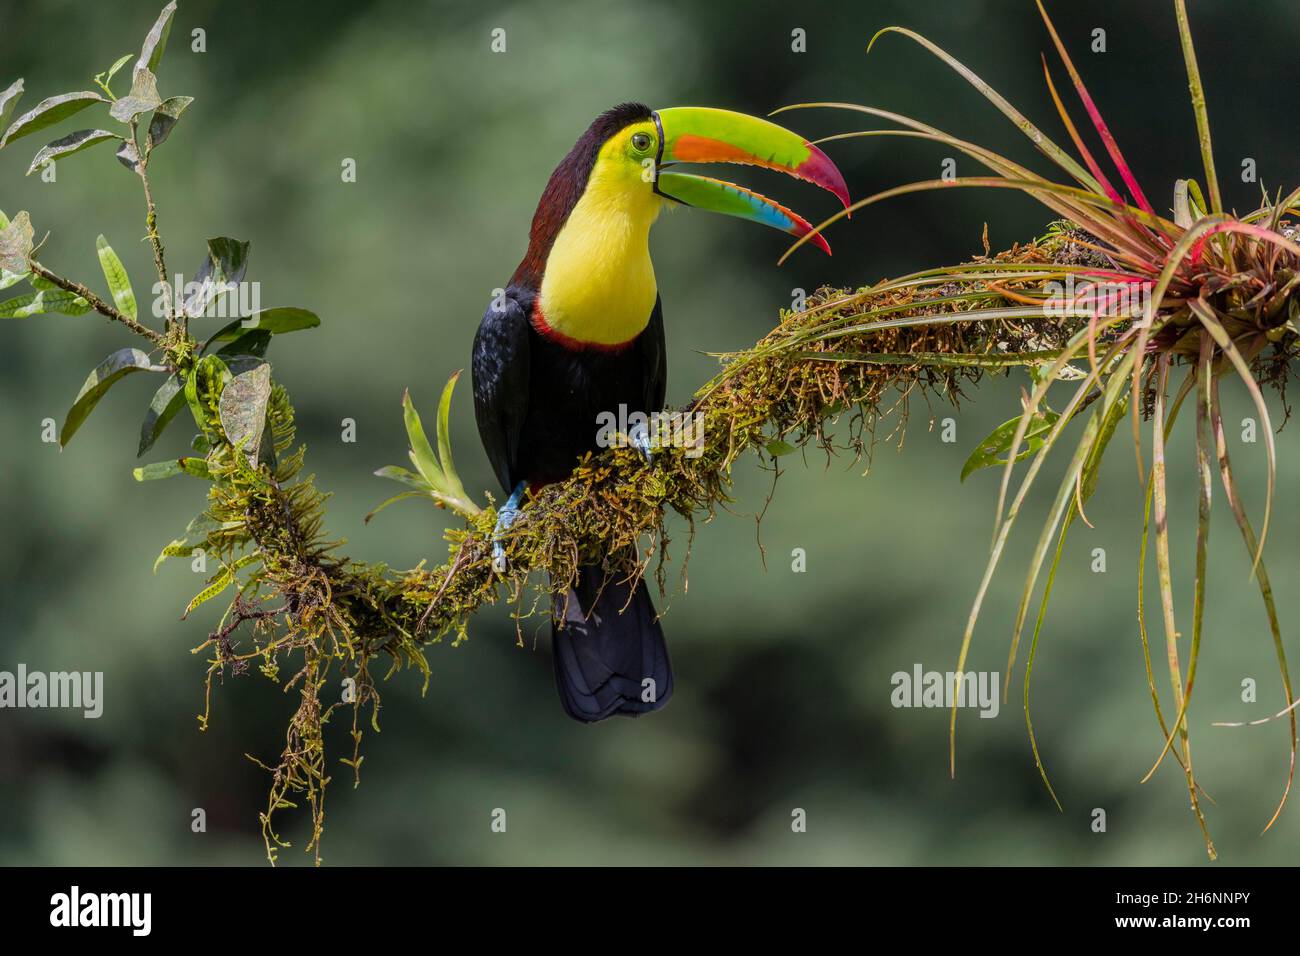 Fishing toucan also called Keel billed Toucan (Ramphastos sulfuratus) on overgrown branch with bromeliads, Boca Topada, Costa Rica Stock Photo